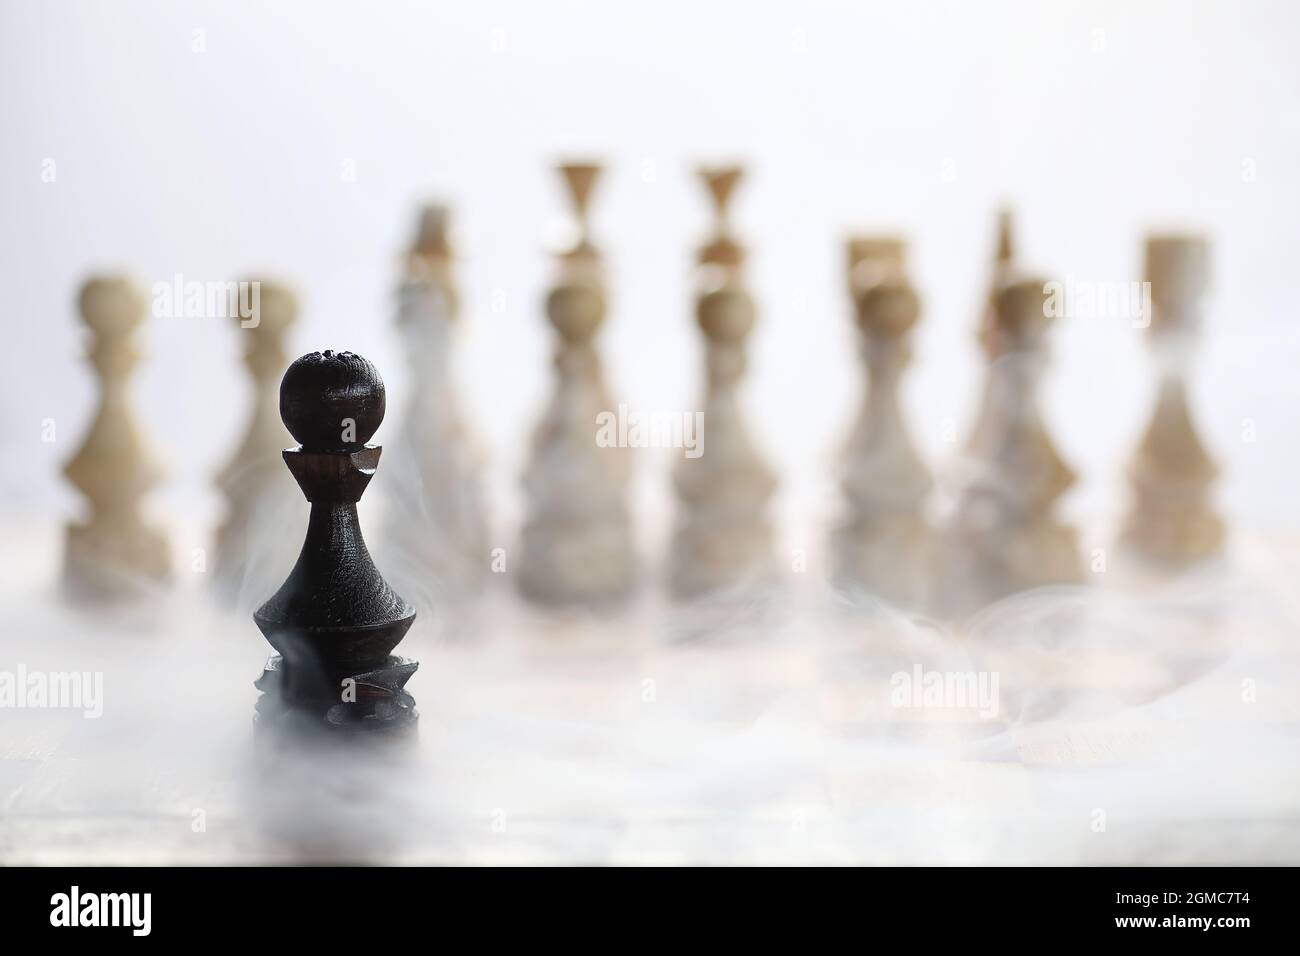 The concept of the chess game at the thoughts of the battlefield Stock Photo